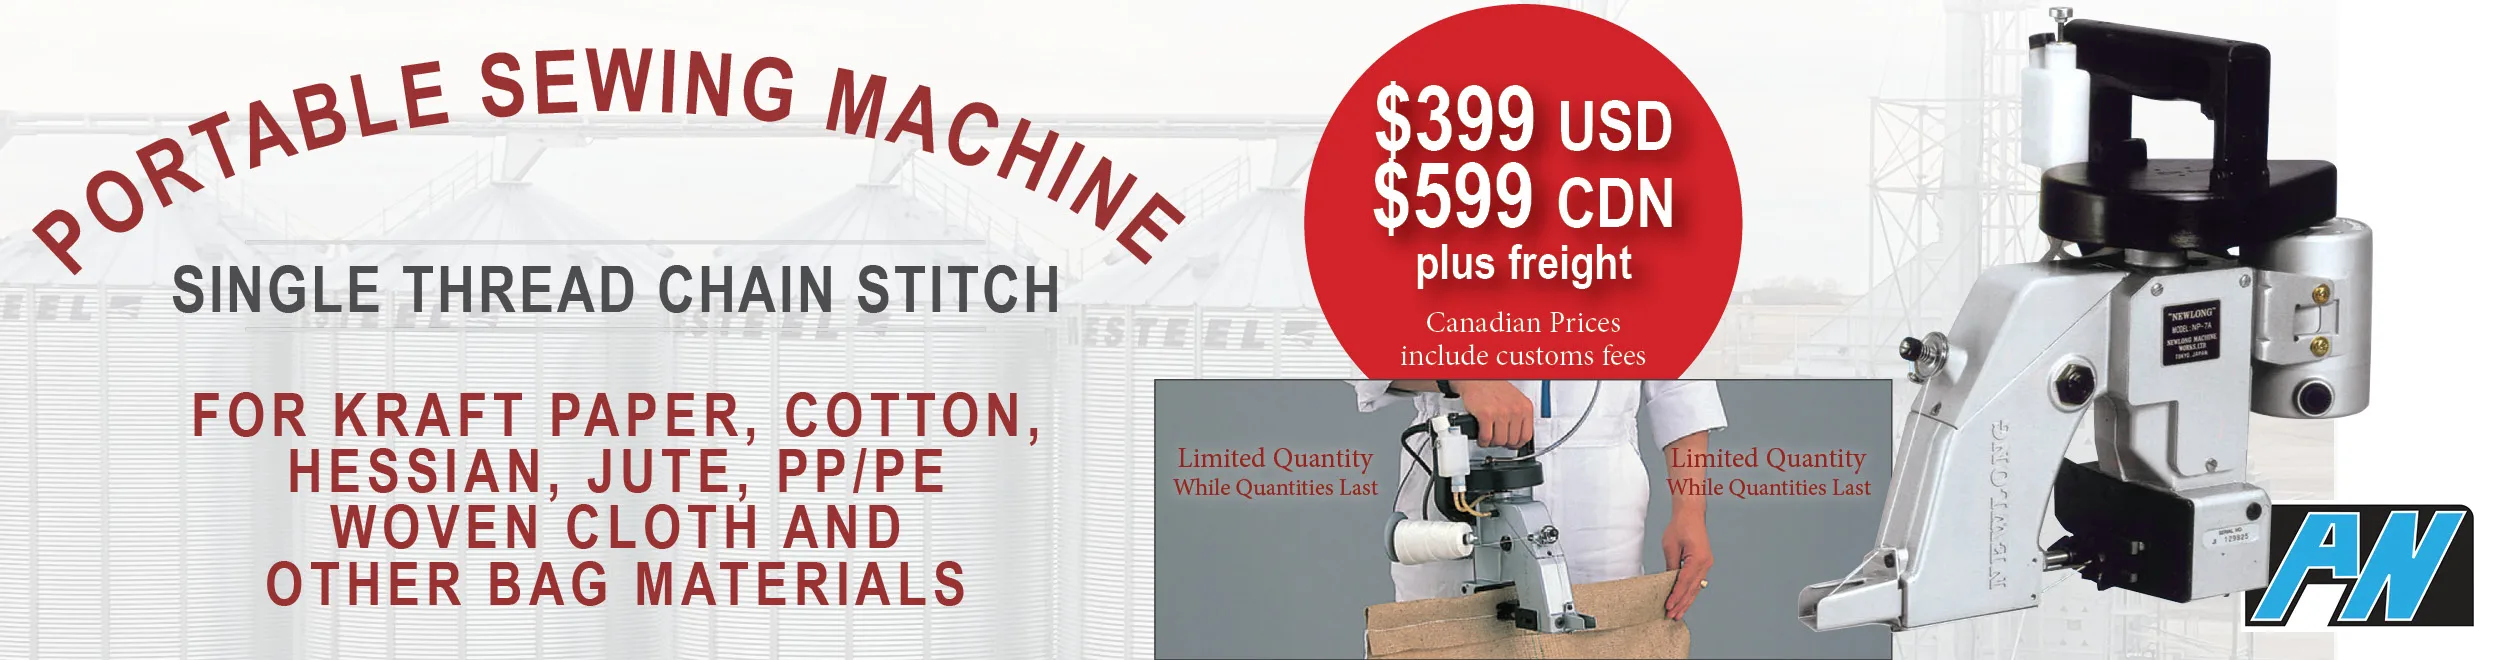 Portable Sewing Machine NP7A for just $399 usd and $599 Cdn - while quantities last